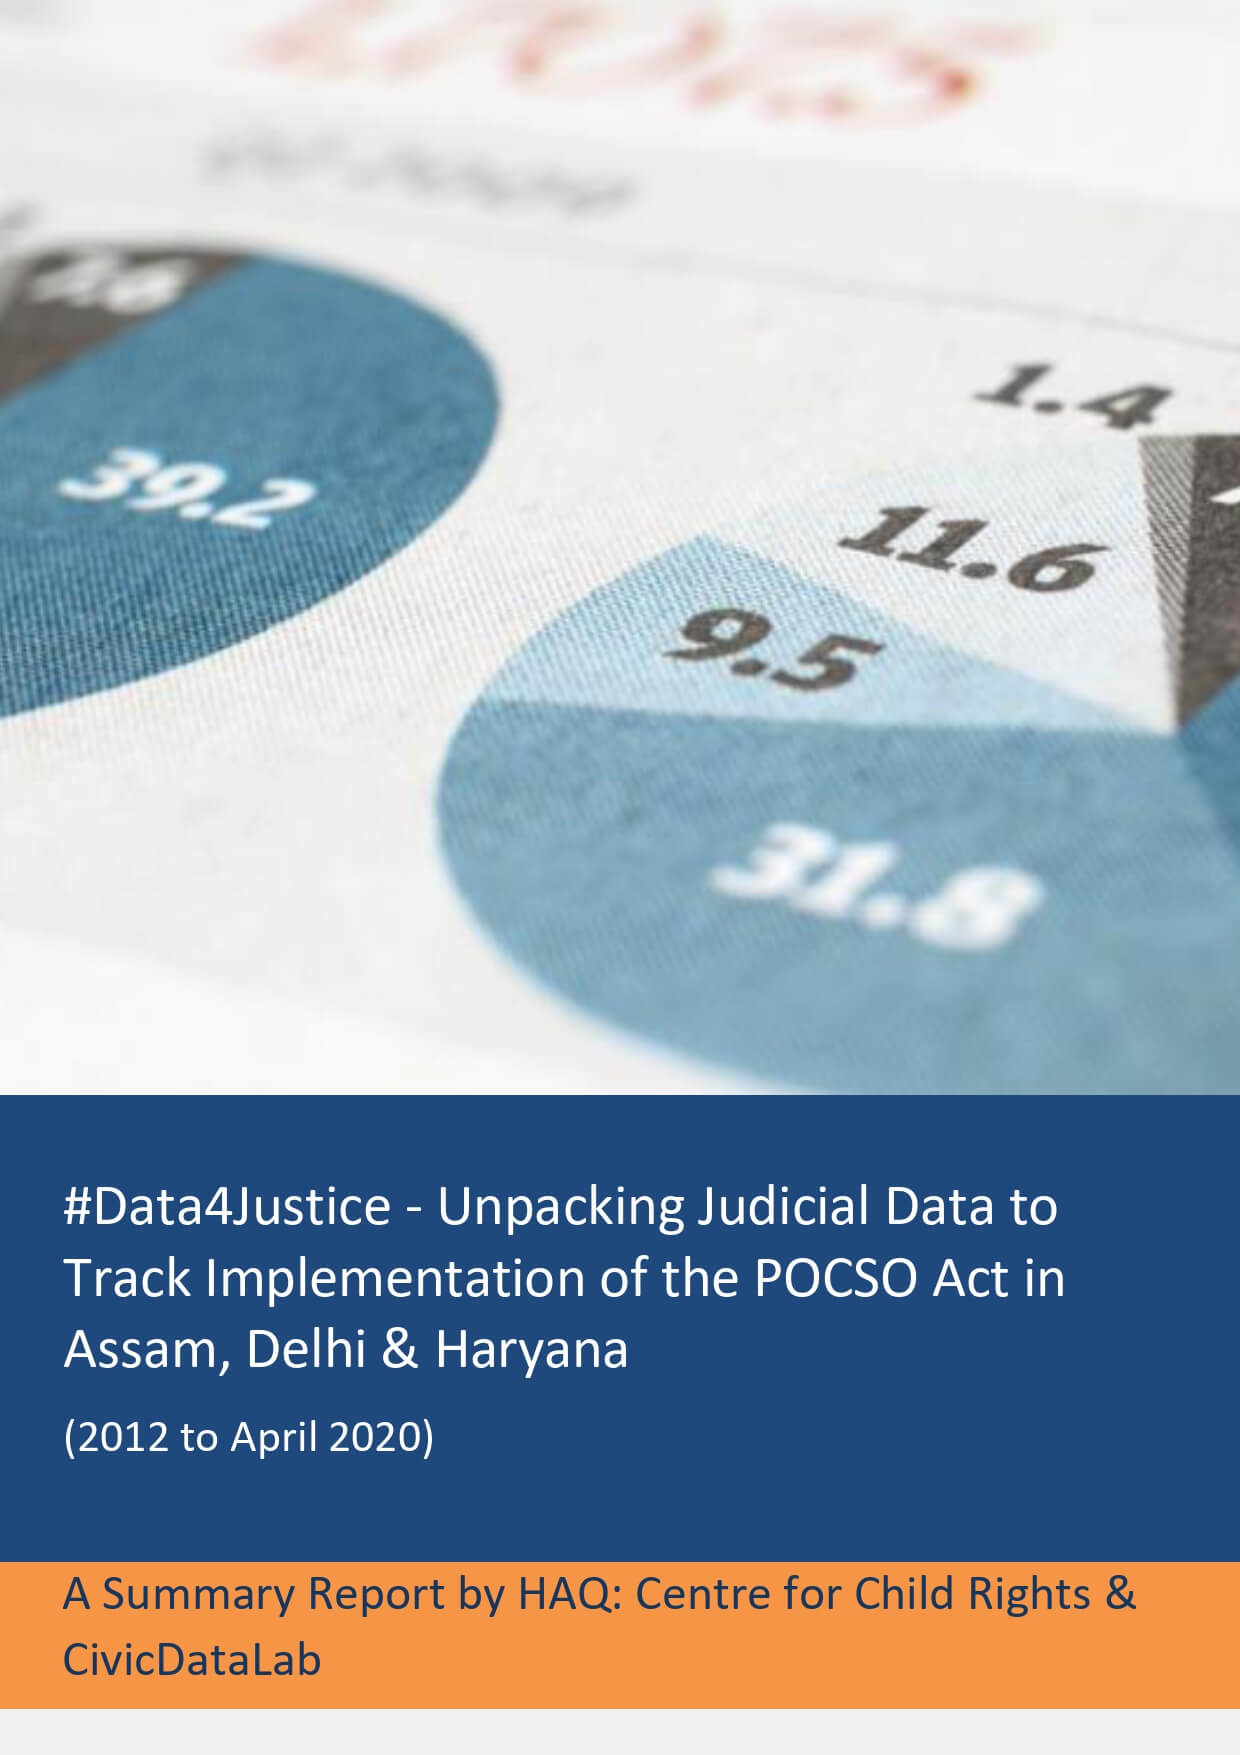 Unpacking Judicial Data to Track Implementation of the POCSO Act in Assam, Delhi & Haryana (2012 to April 2020) A Summary Report